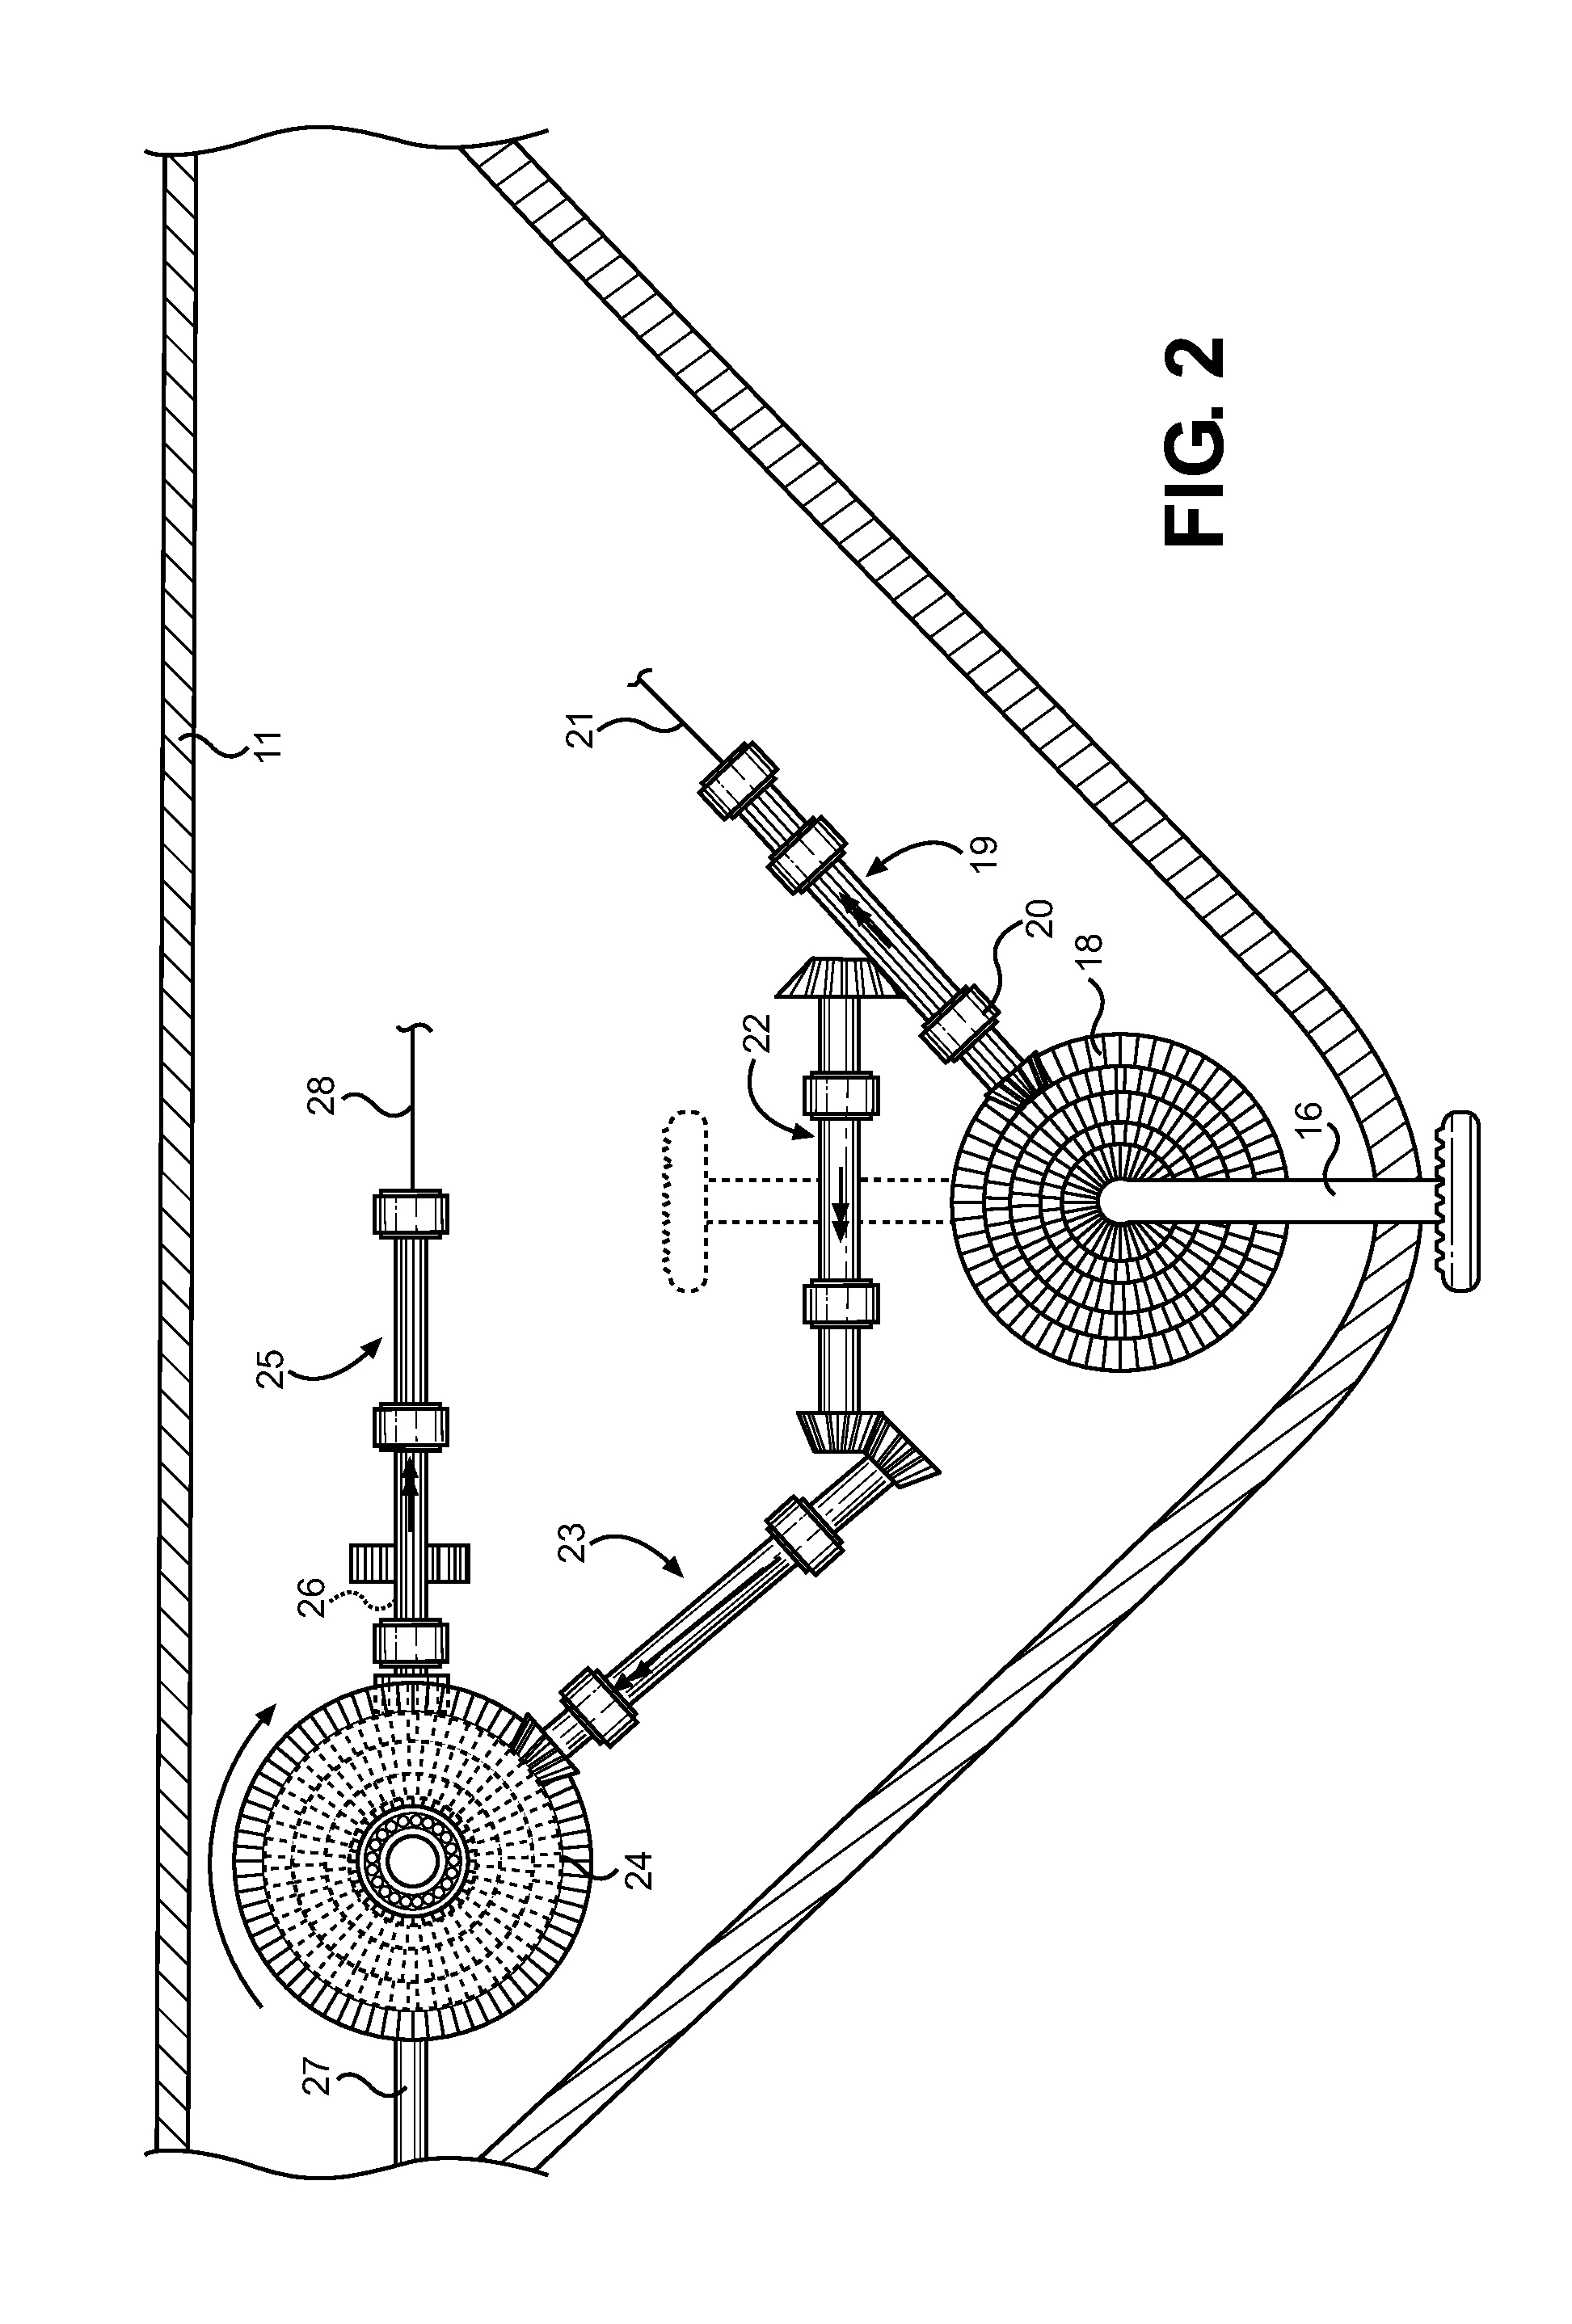 Bicycle device with direct drive transmission and hubless wheels